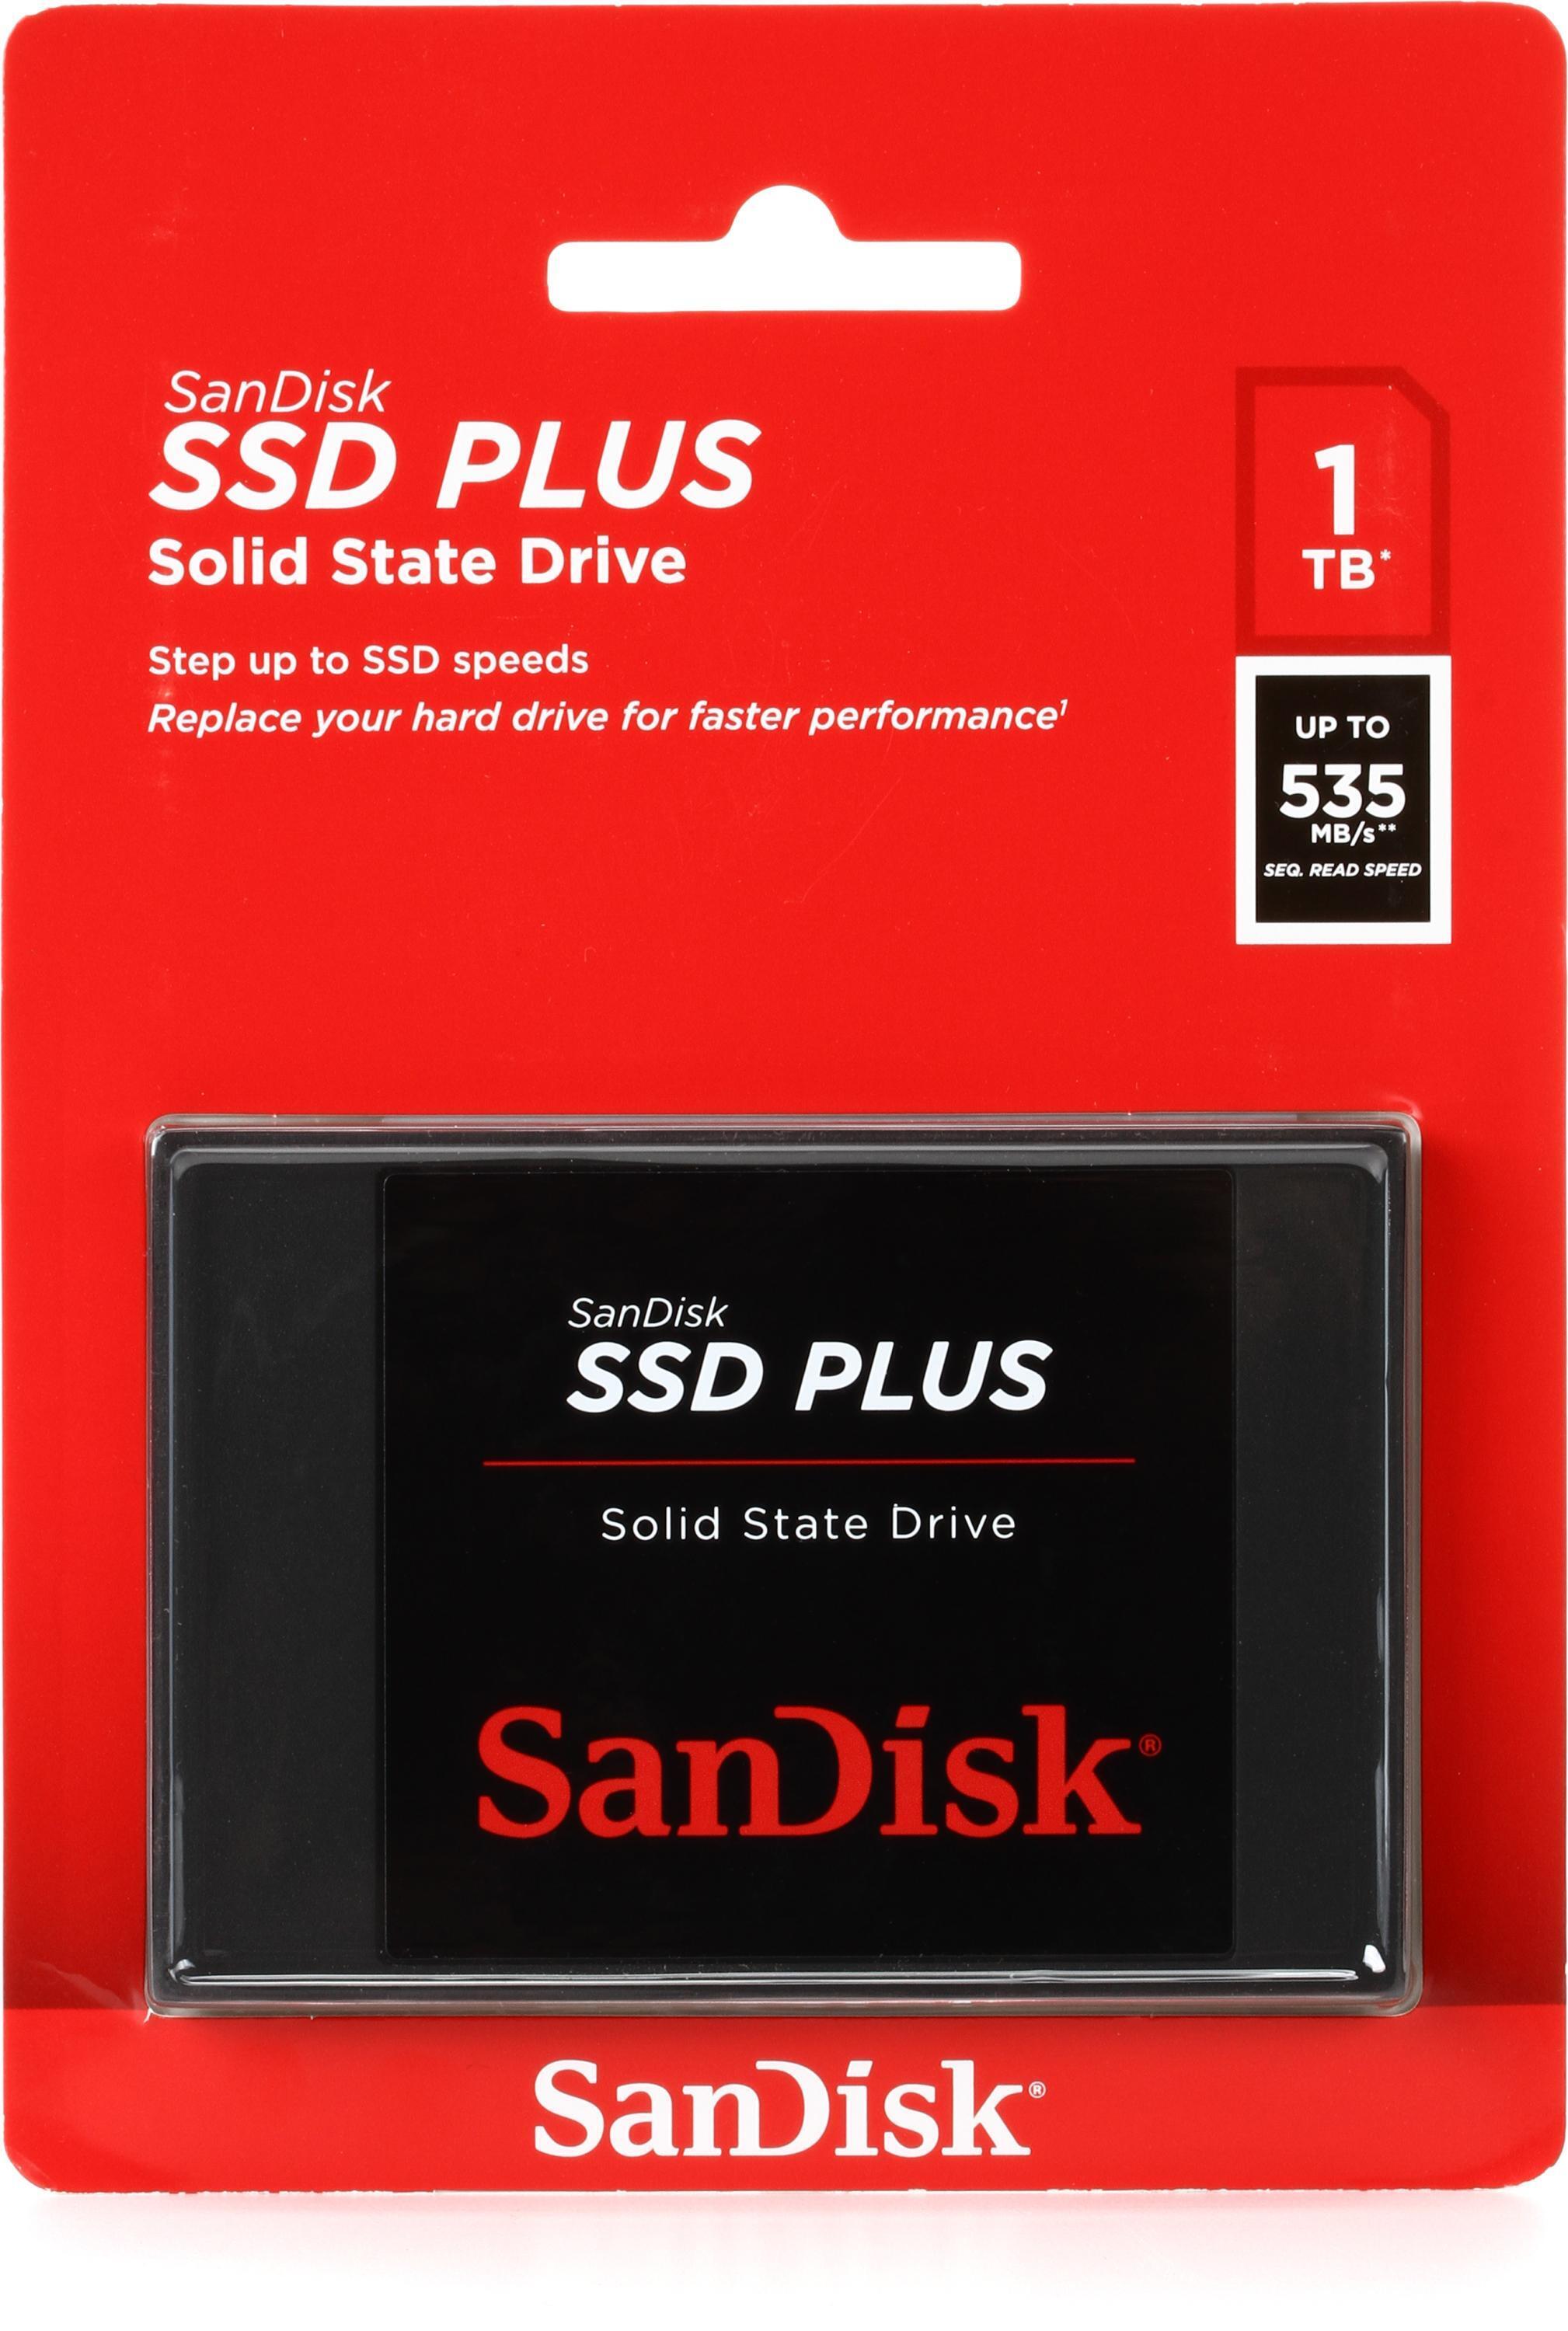 How to Install a SanDisk® SSD in Your Laptop